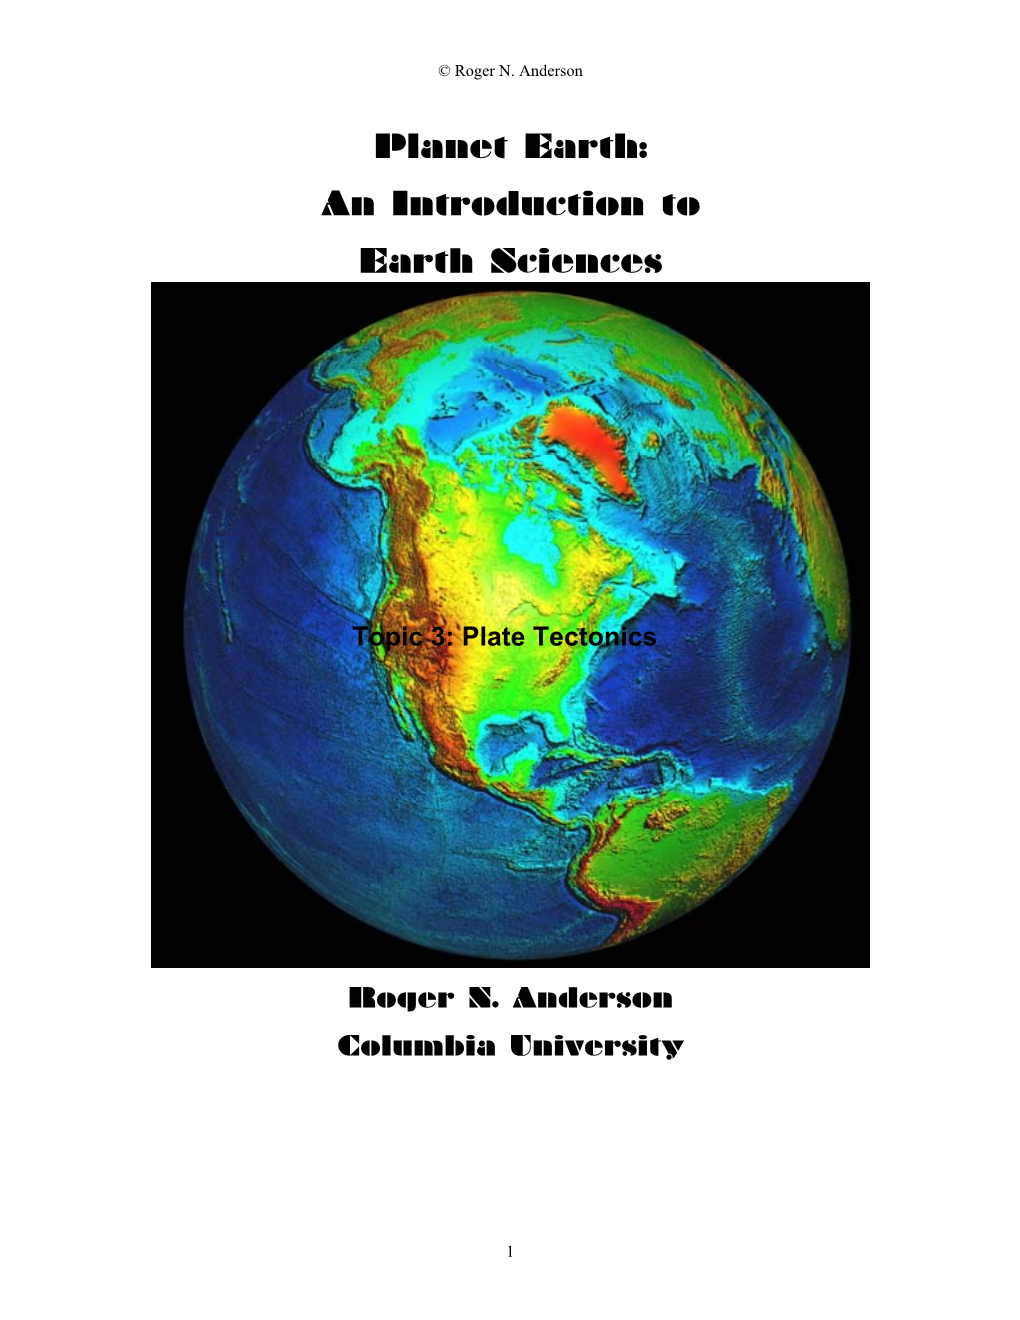 Planet Earth: an Introduction to Earth Sciences, Topic 3: Plate Tectonics